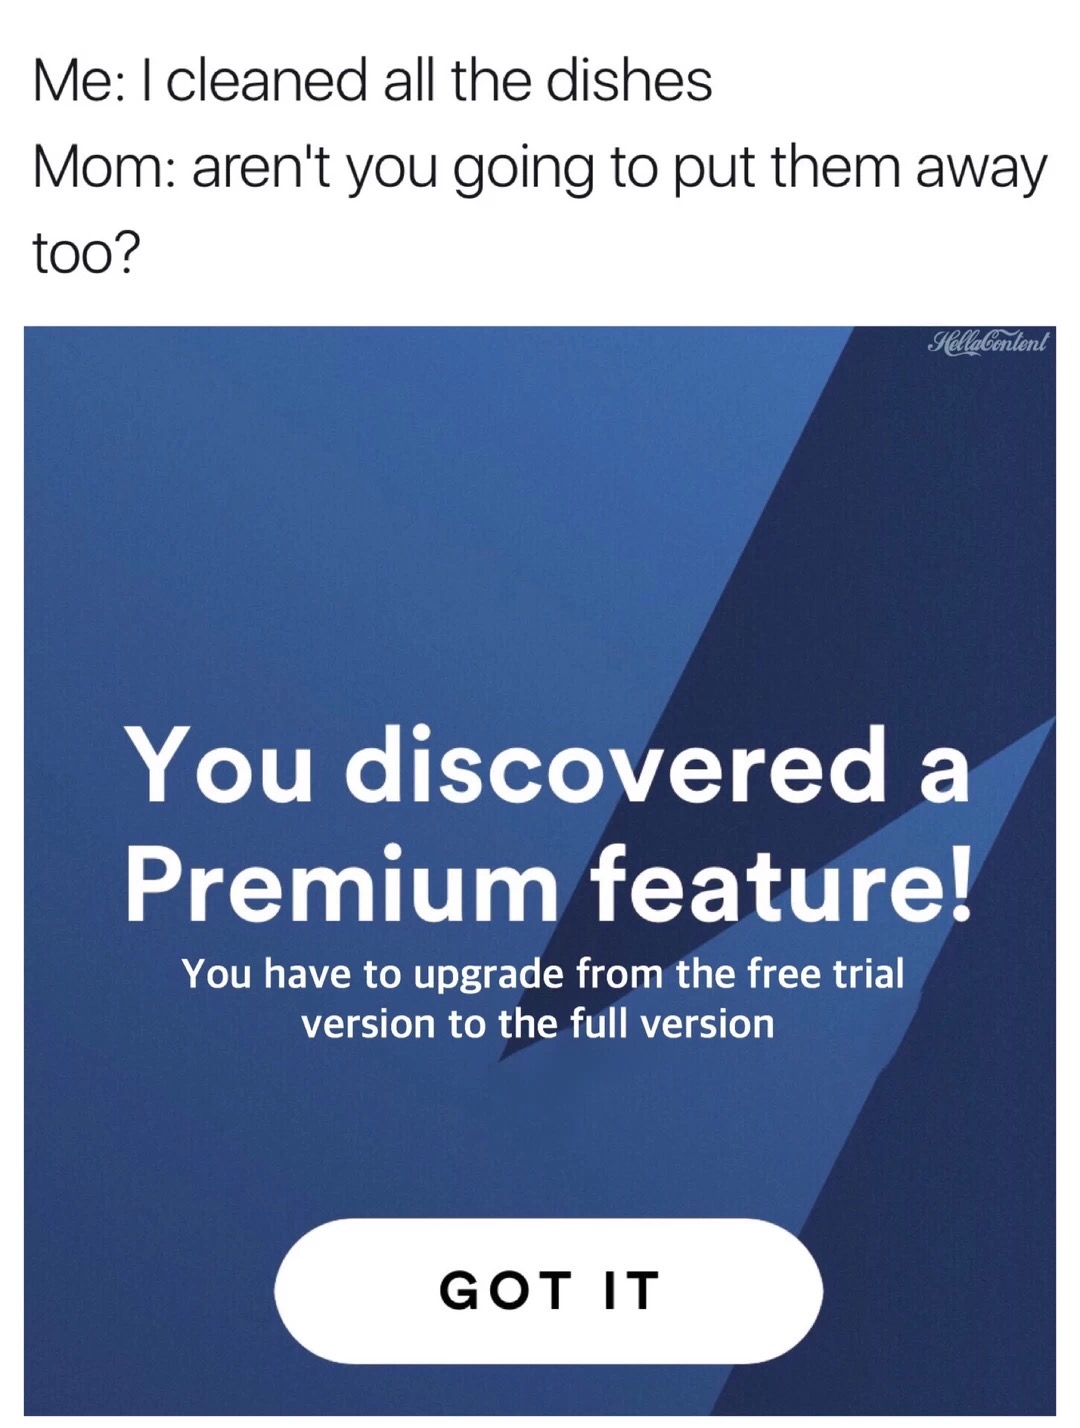 you discovered a premium feature spotify - Me I cleaned all the dishes Mom aren't you going to put them away too? HolaContent You discovered a Premium feature! You have to upgrade from the free trial version to the full version Got It